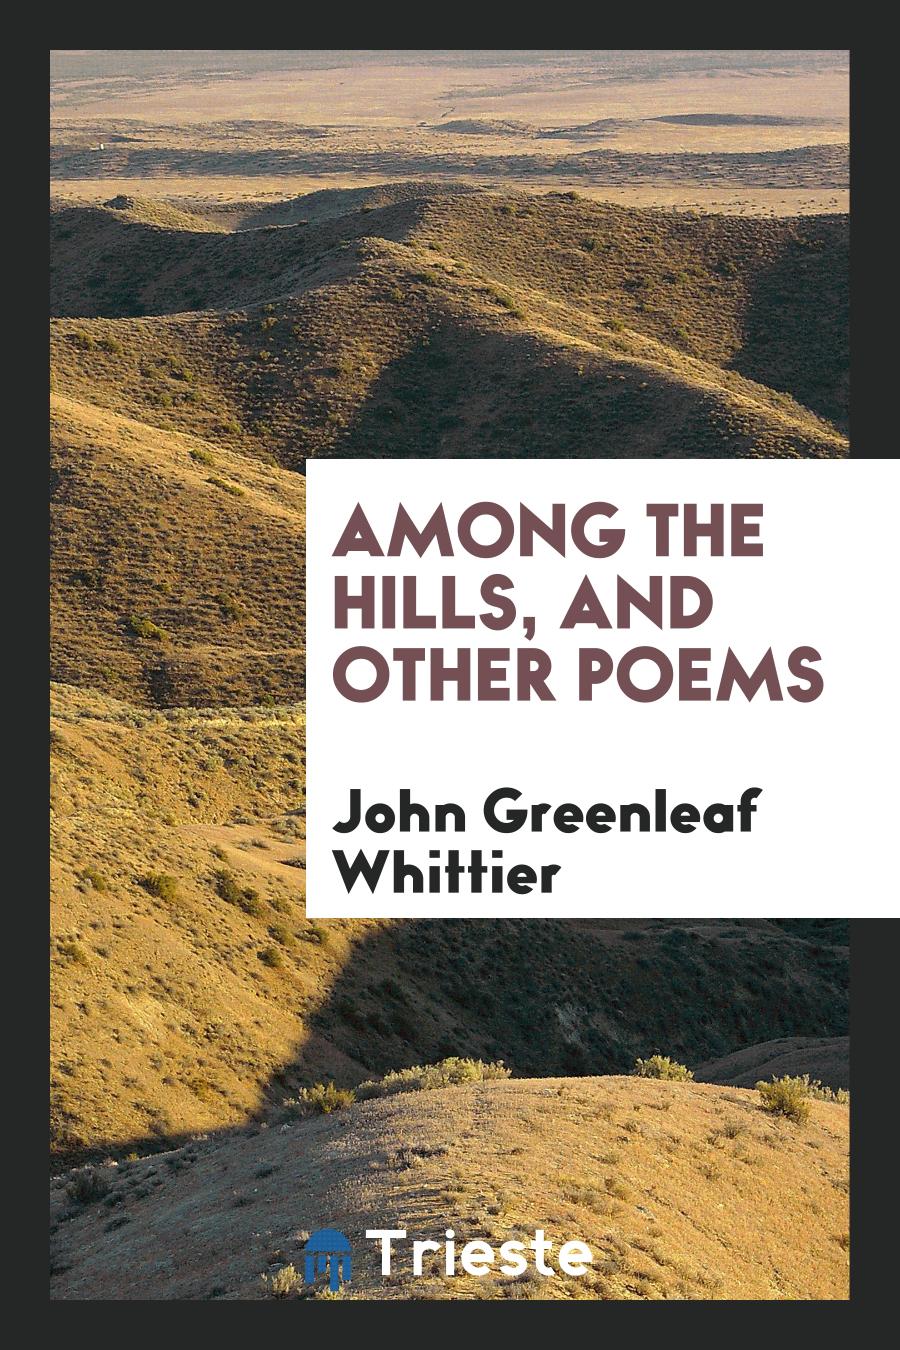 Among the Hills, and Other Poems